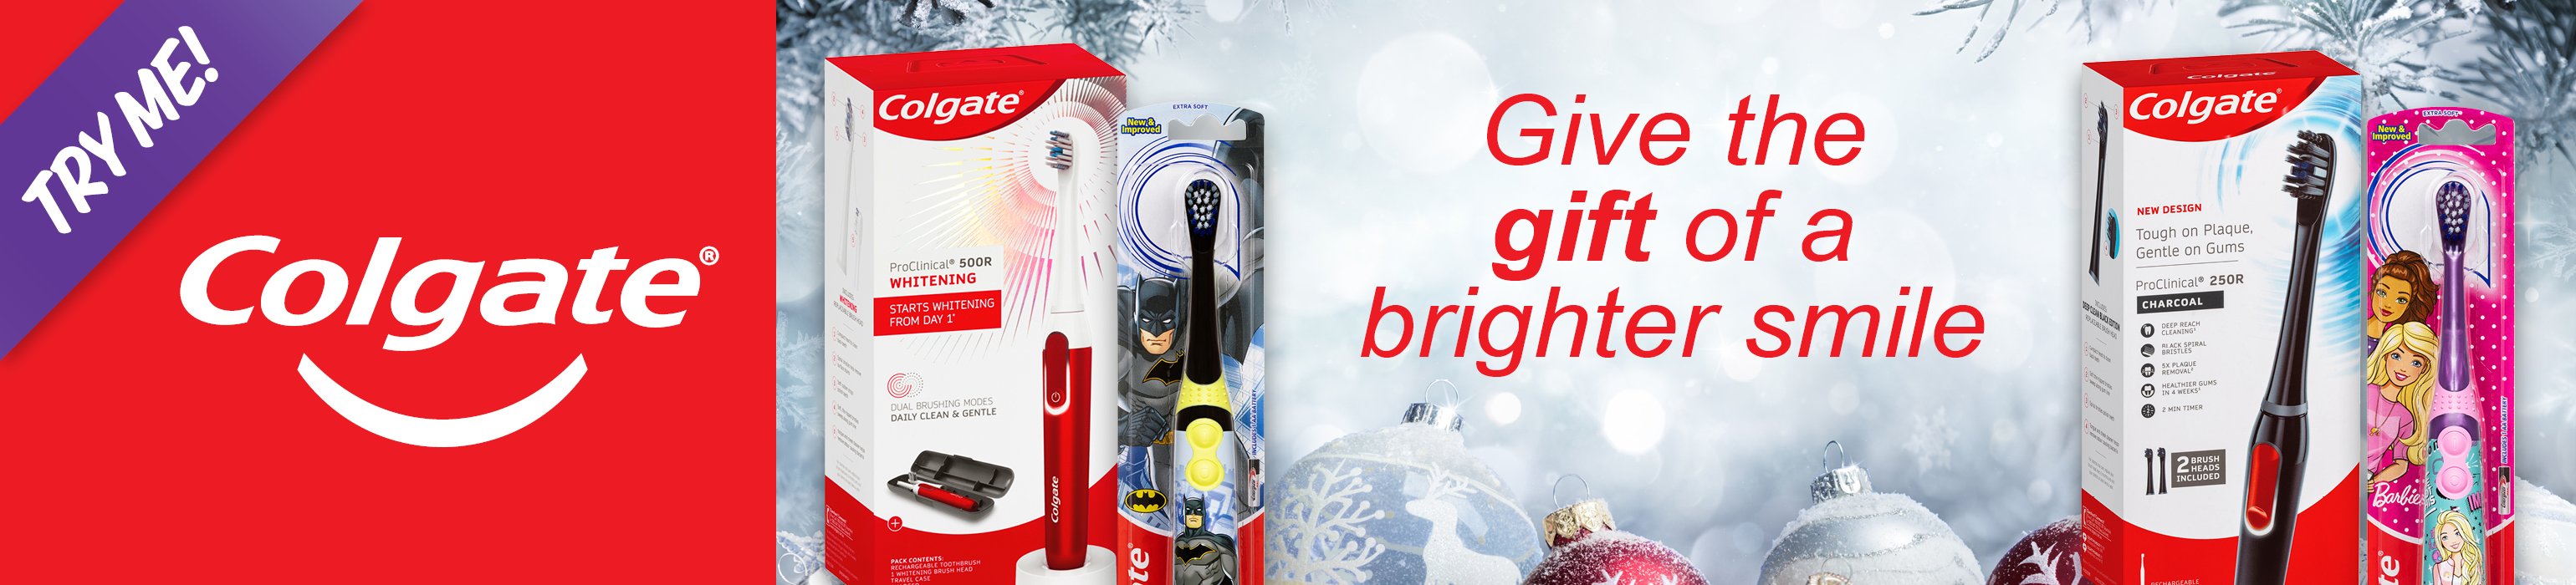 Give the gift of a smile with Colgate